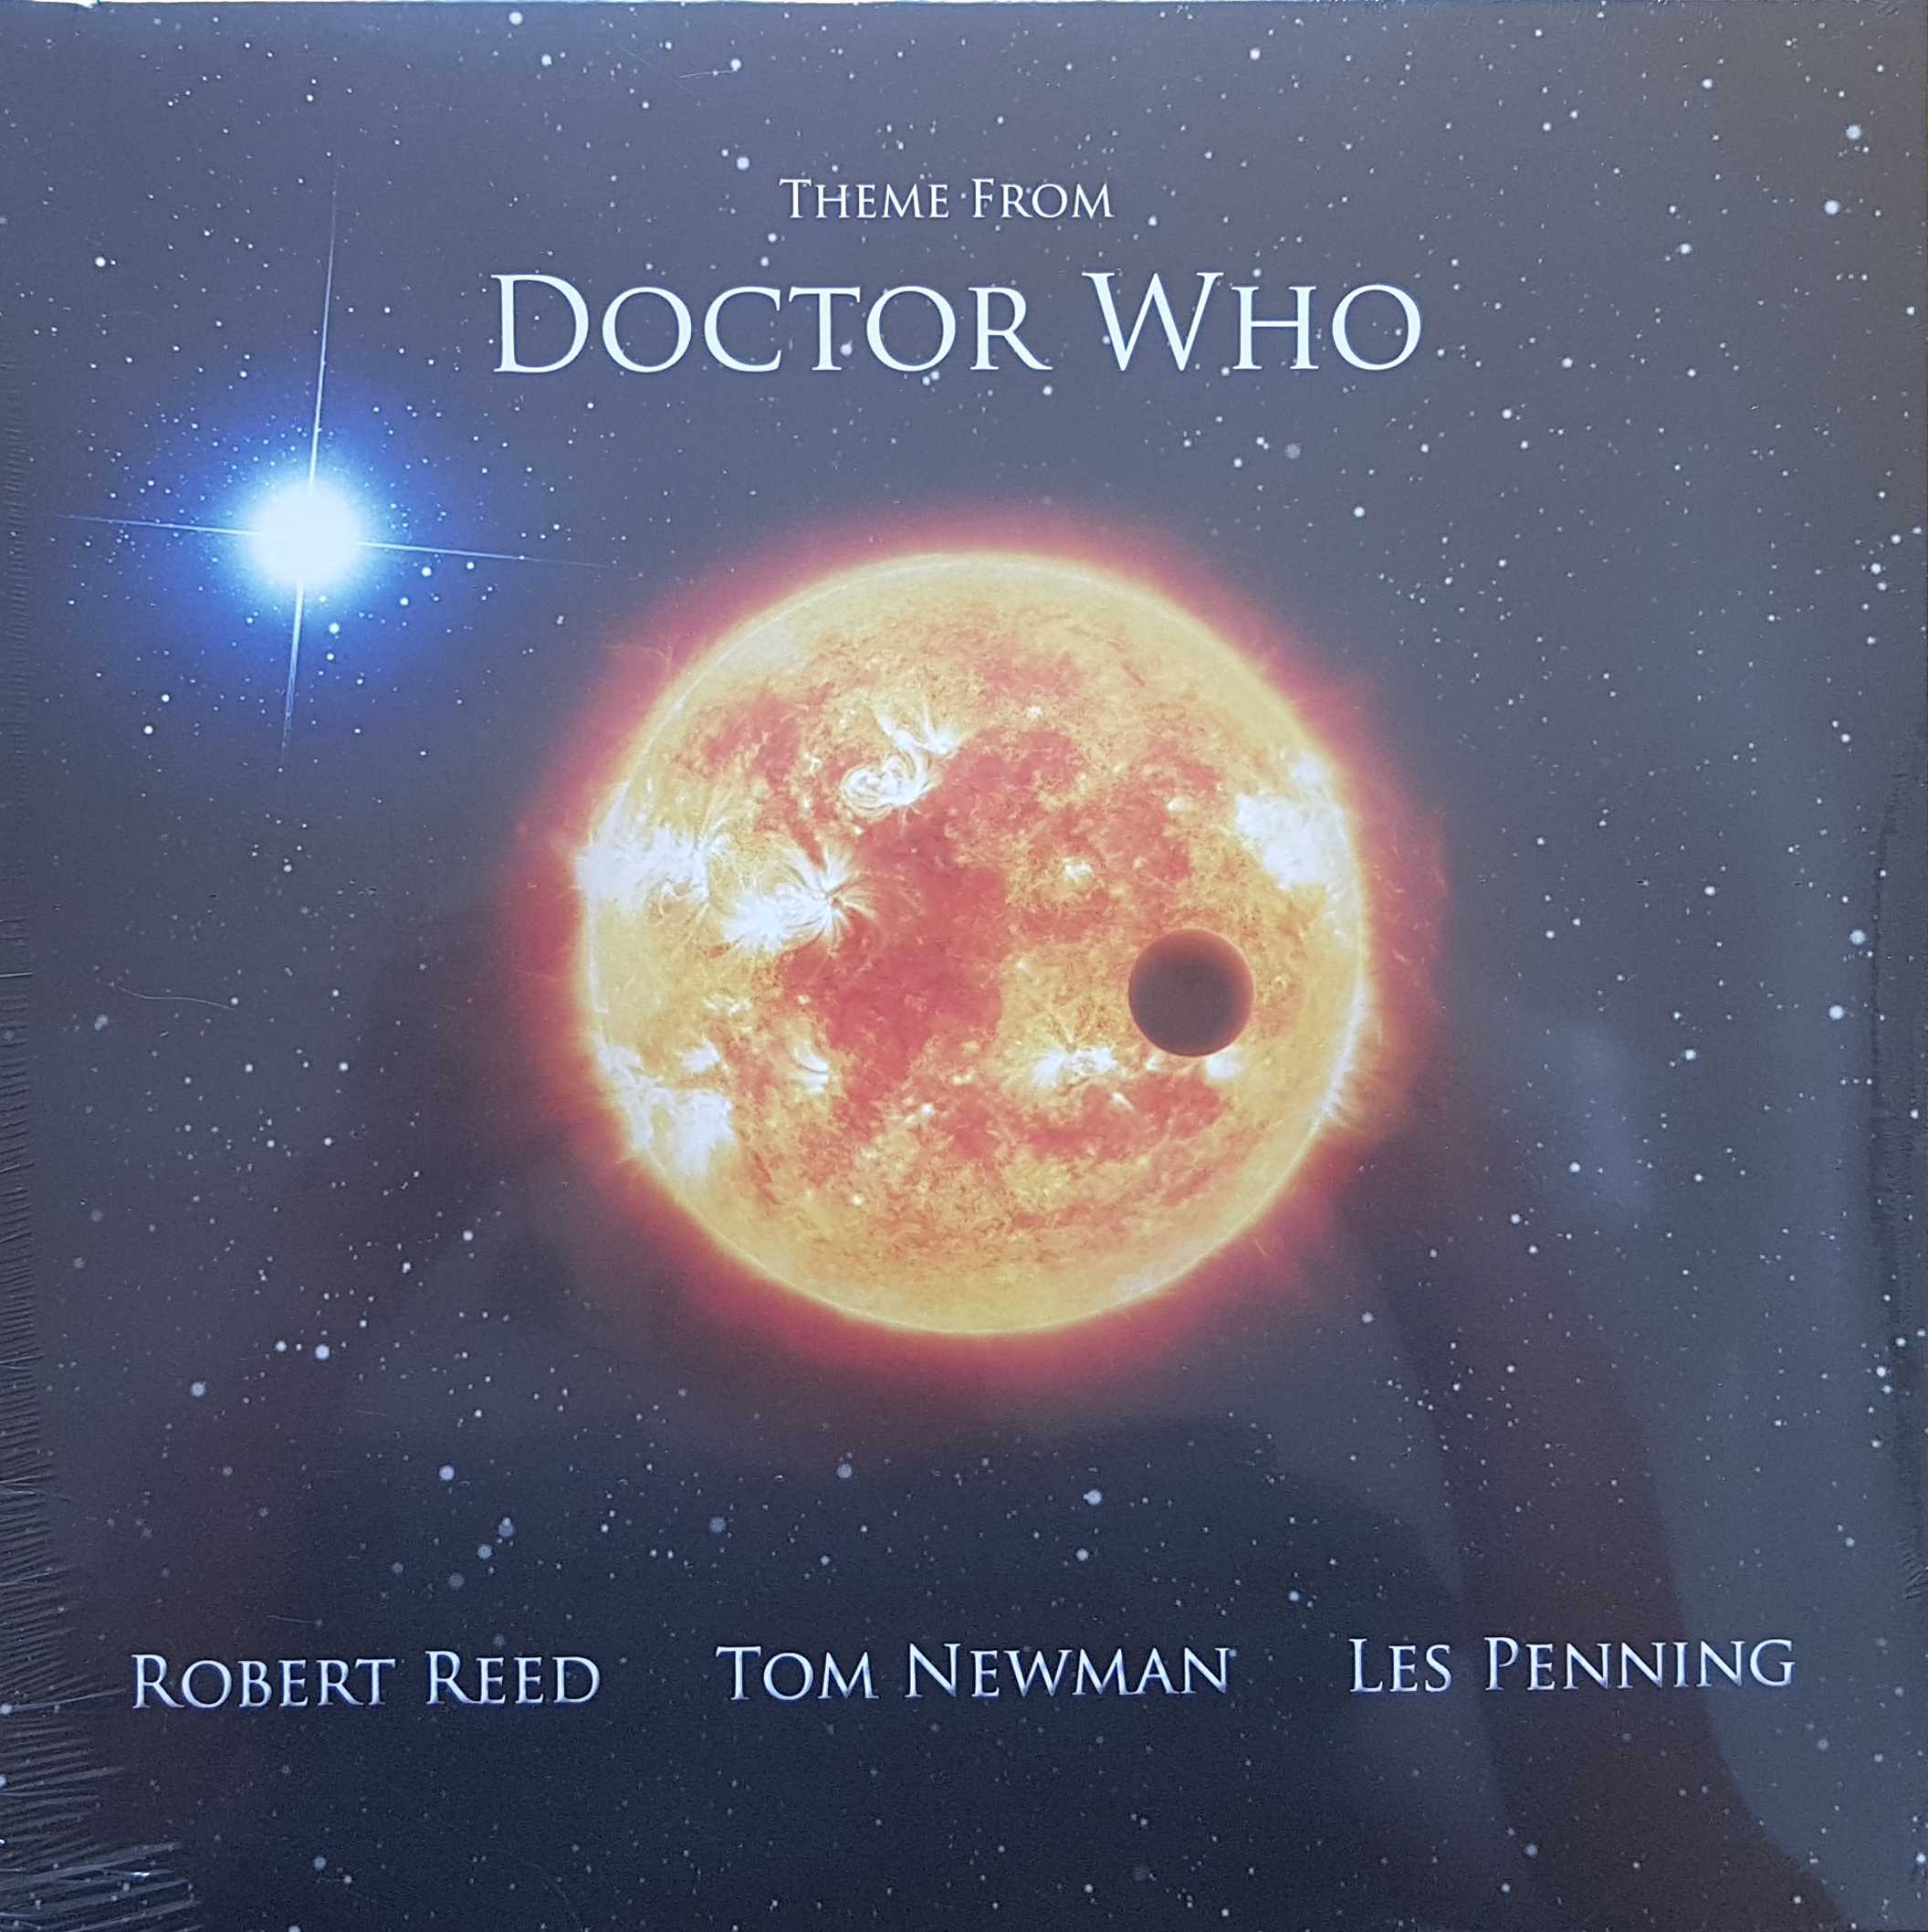 Picture of Theme from Doctor Who by artist Robert Reed / Tom Newman / Les Penning / Ron Grainer from the BBC 12inches - Records and Tapes library